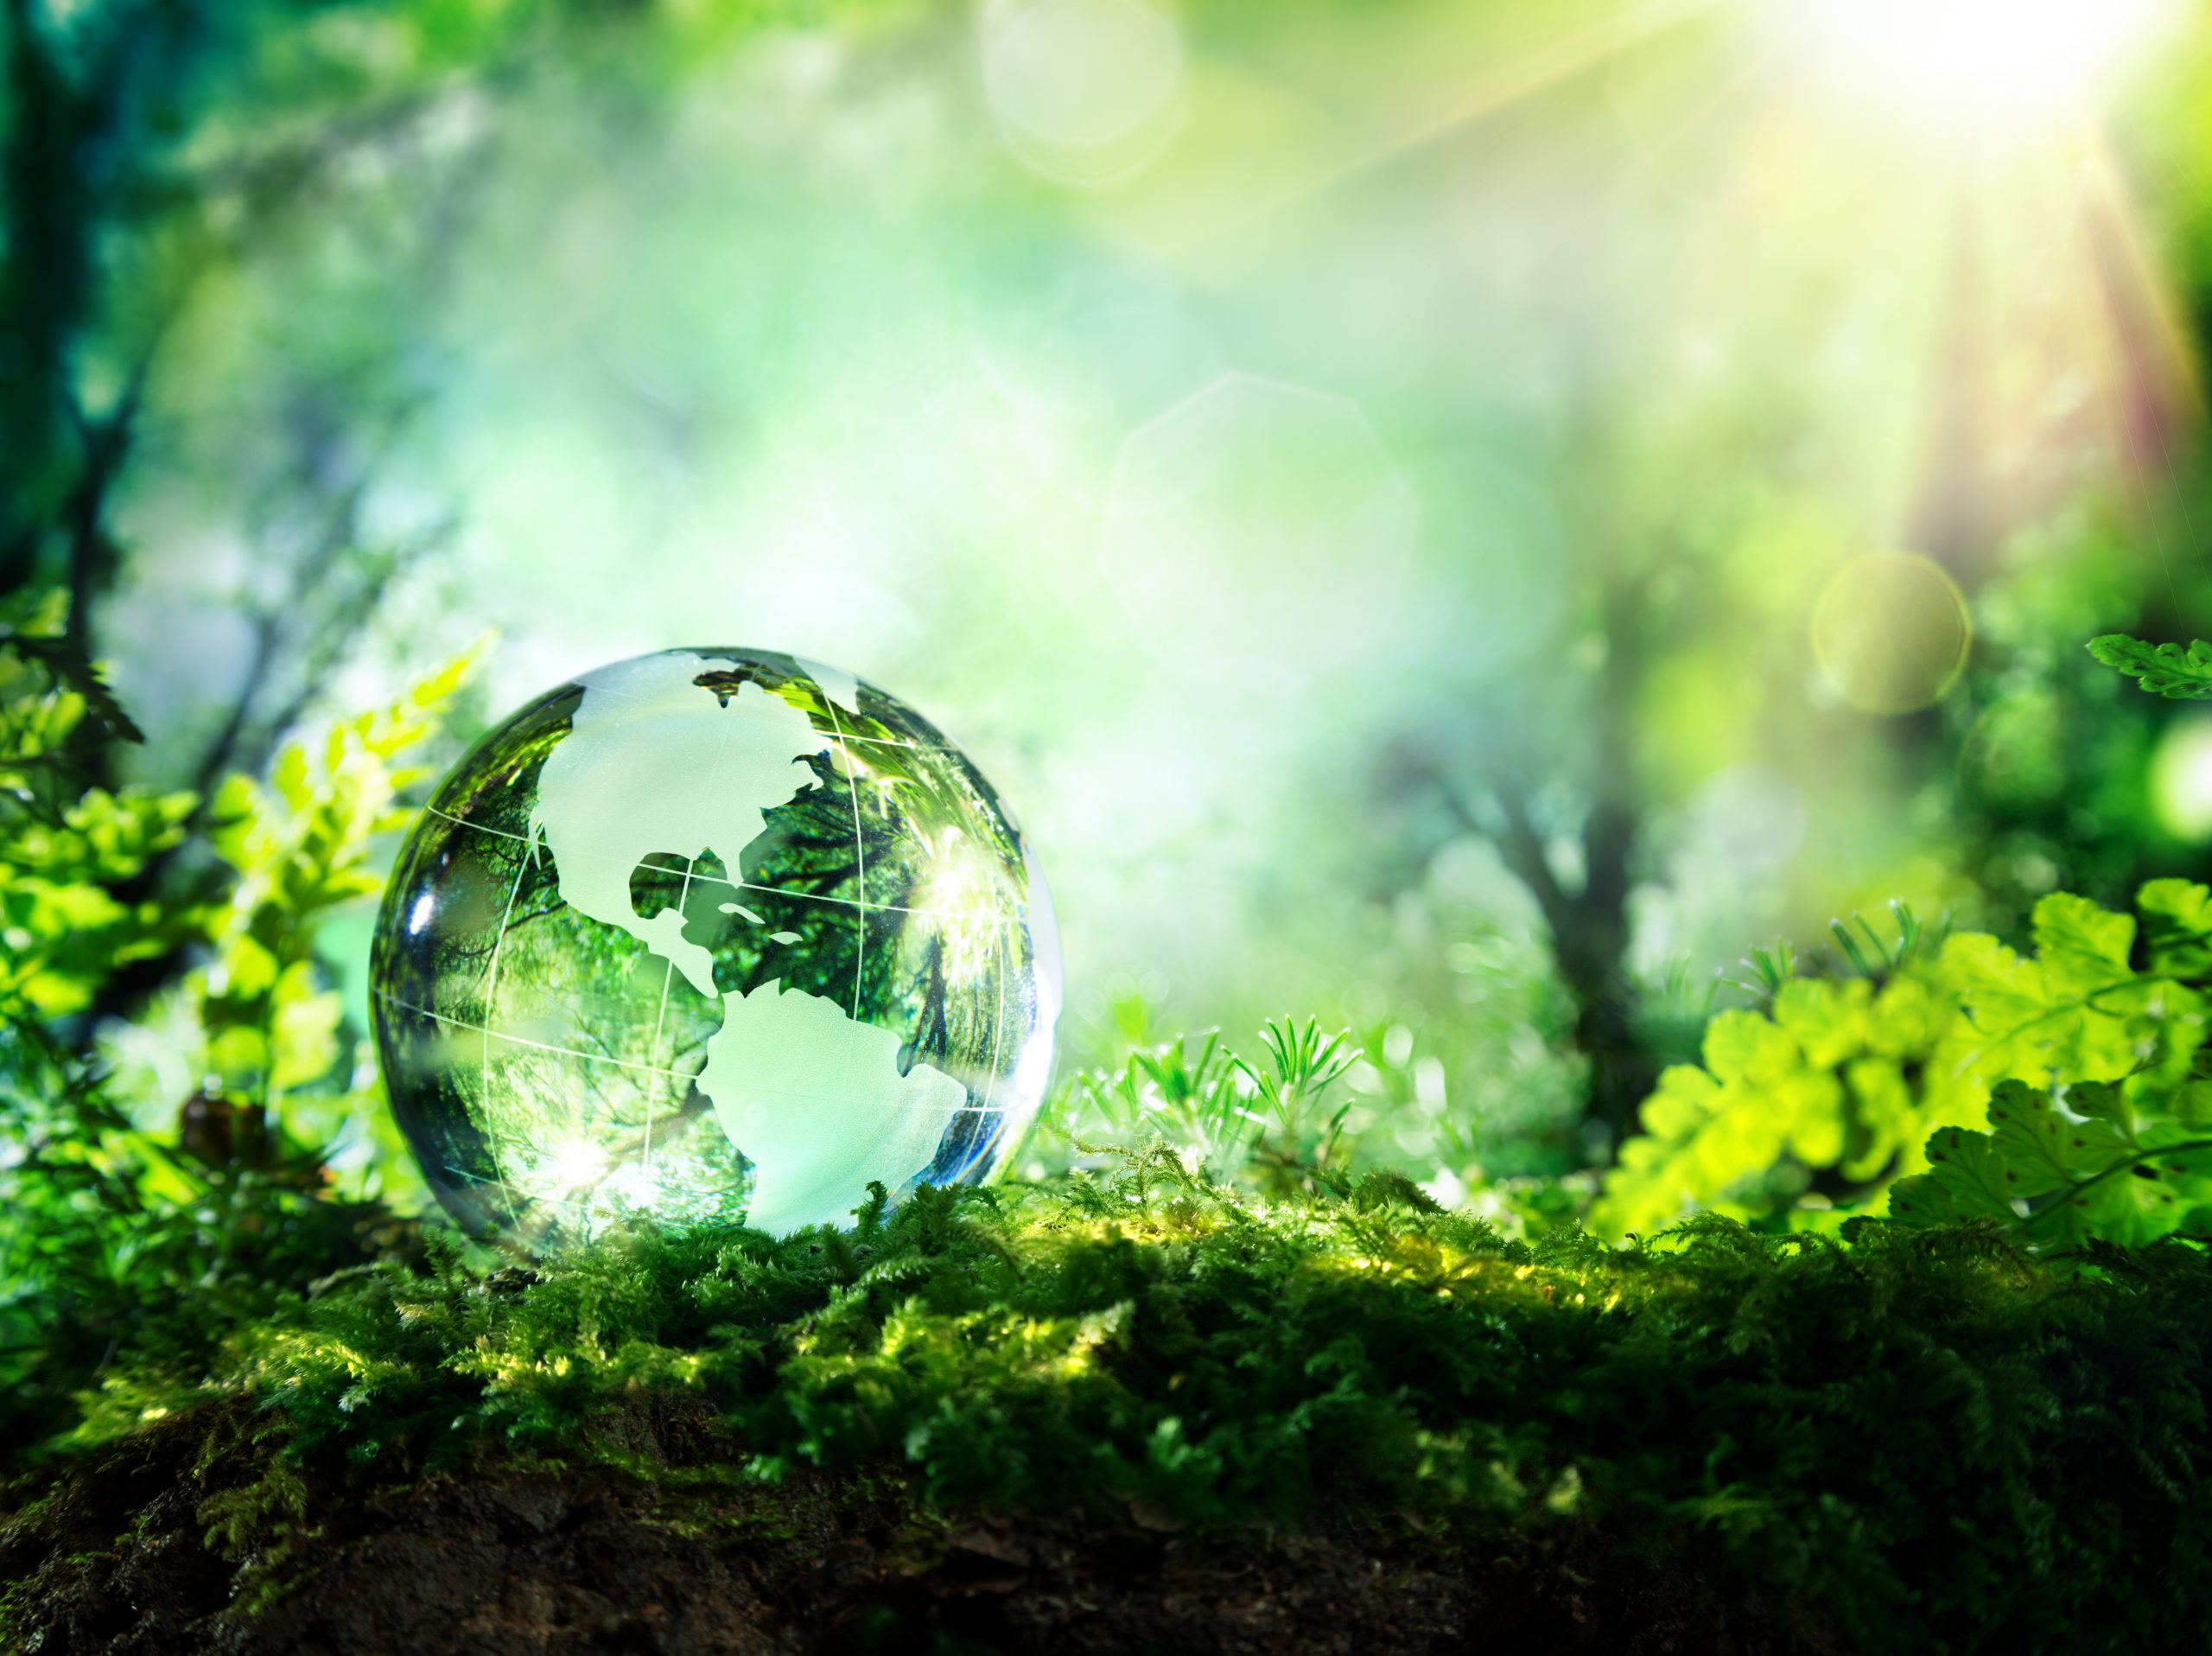 crystal globe resting on moss in a forest with sunlight shining light shining down.